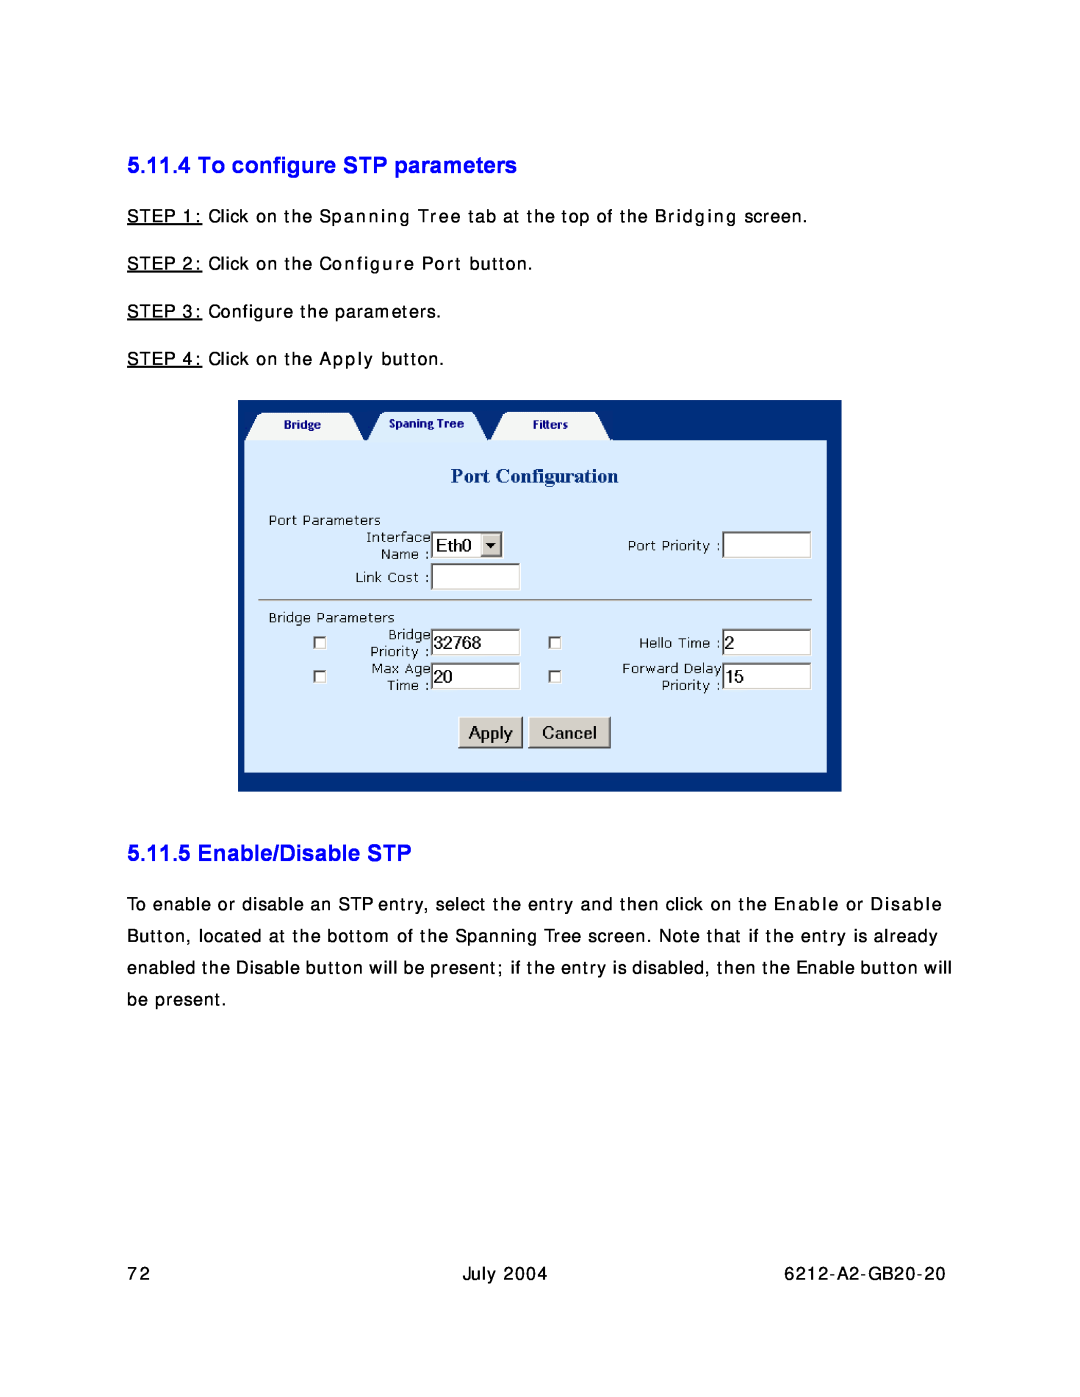 Paradyne 6212 manual To configure STP parameters, Enable/Disable STP 